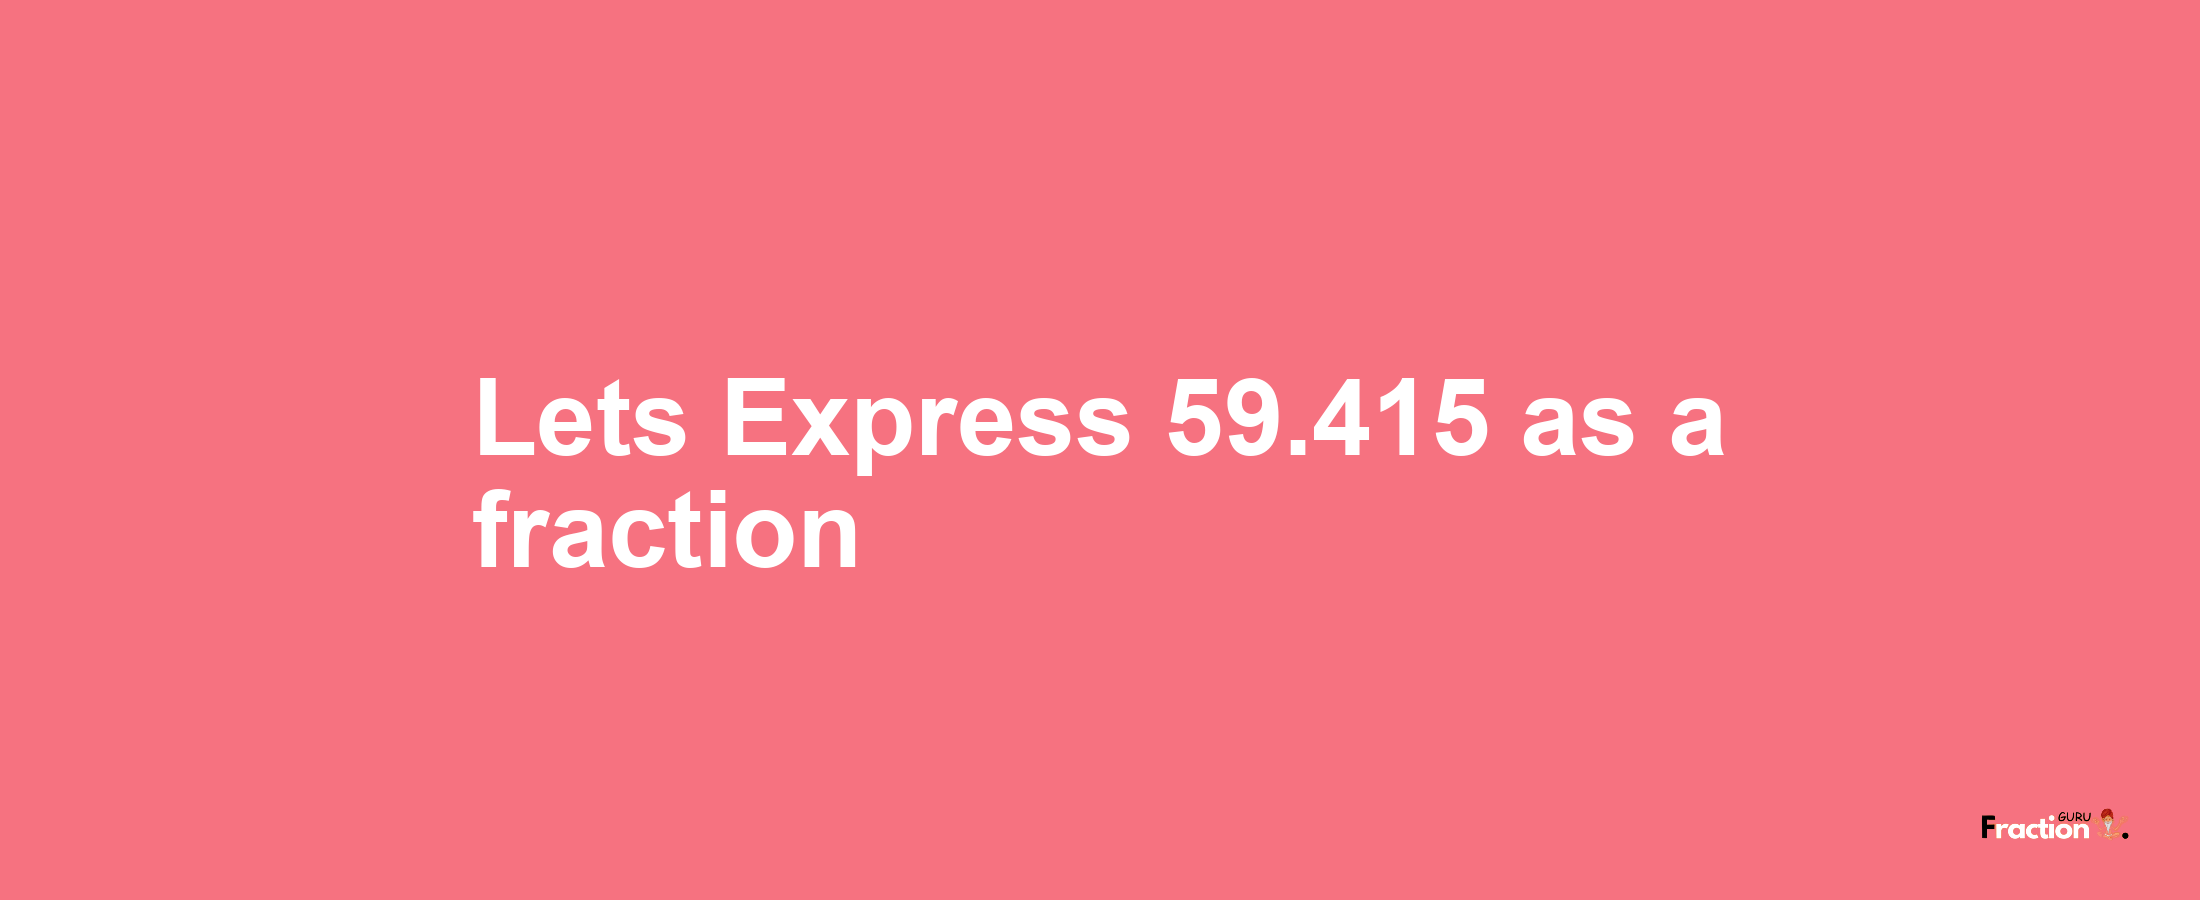 Lets Express 59.415 as afraction